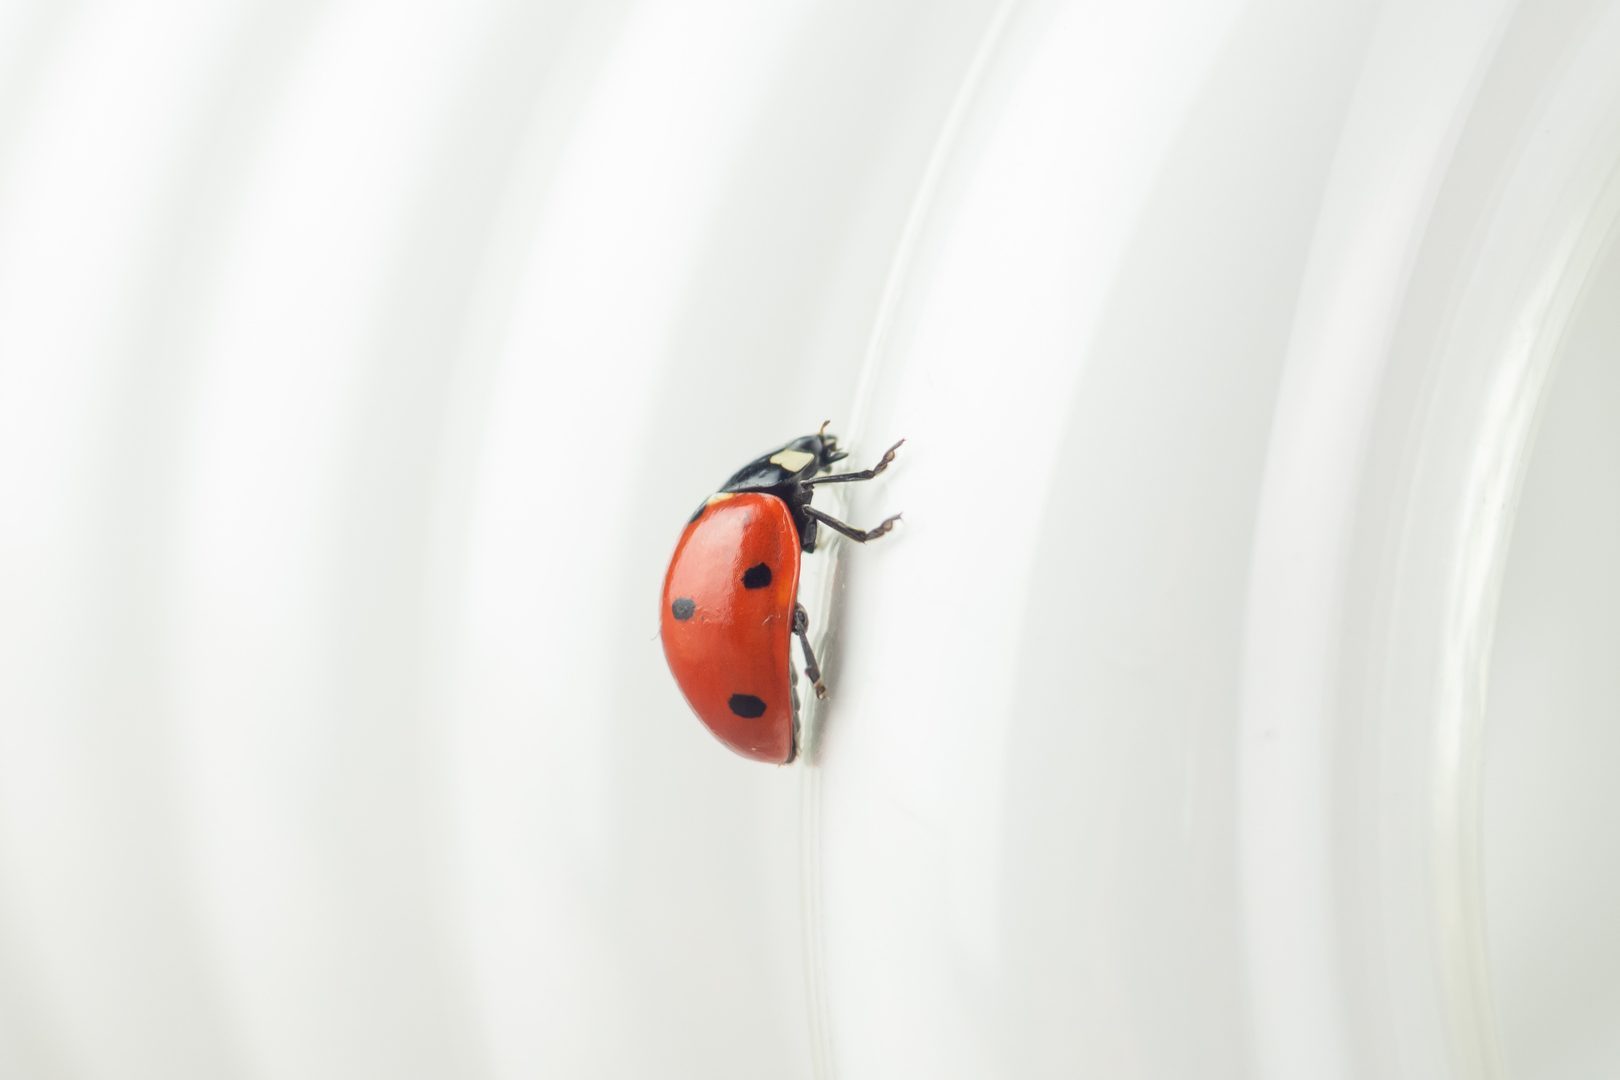 Ladybug in the spirals of an energy efficient light bulb